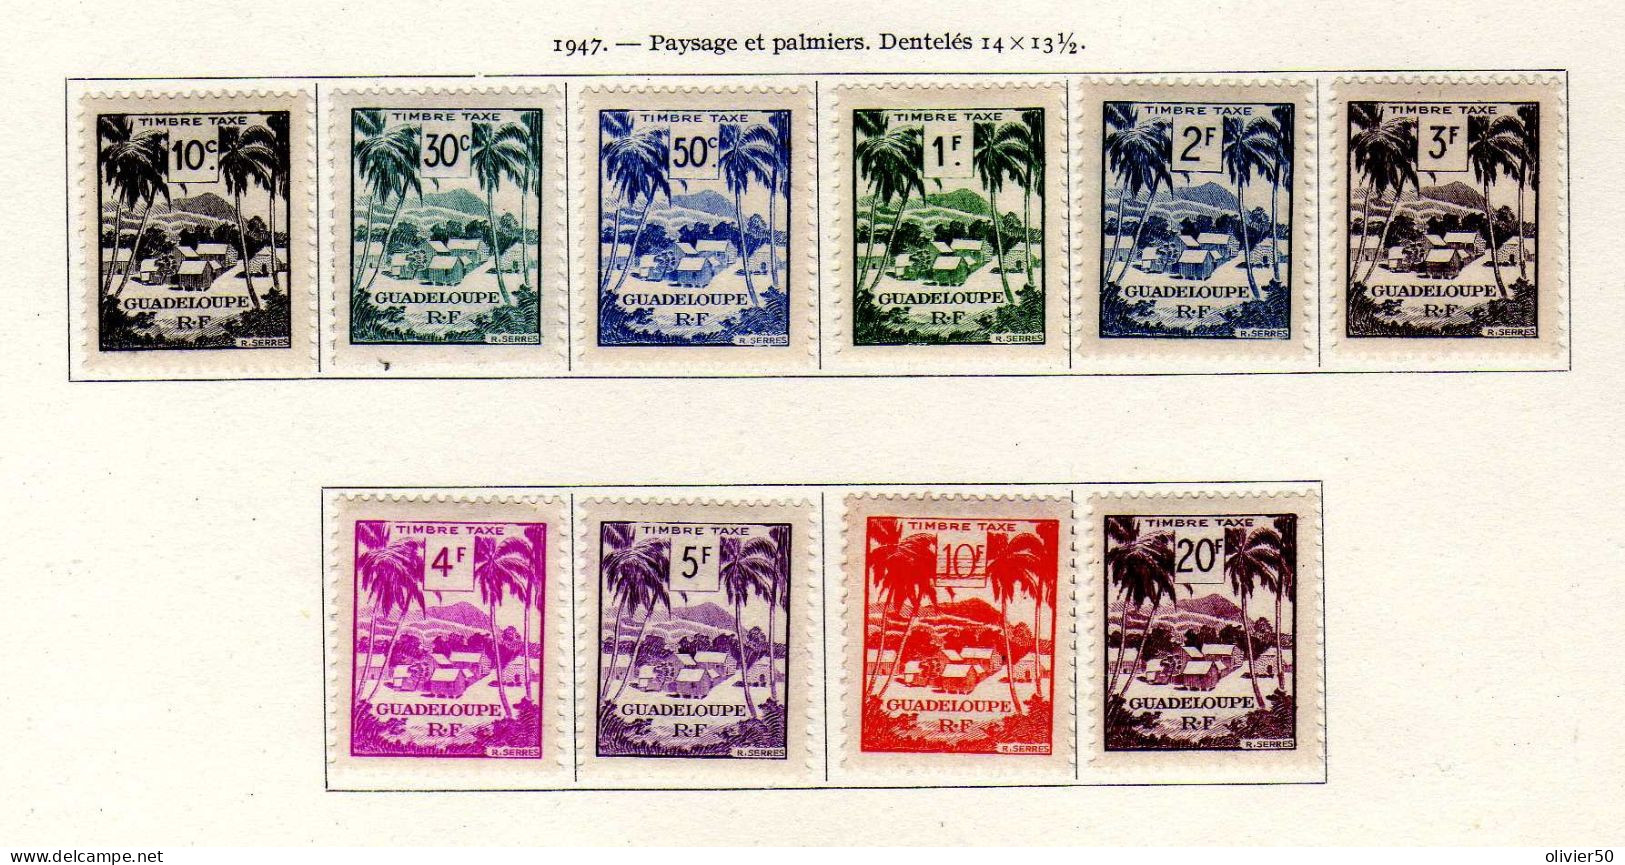 Guadeloupe - 1947 - Timbres-Taxe Palmiers - Neufs* - MH - Timbres-taxe